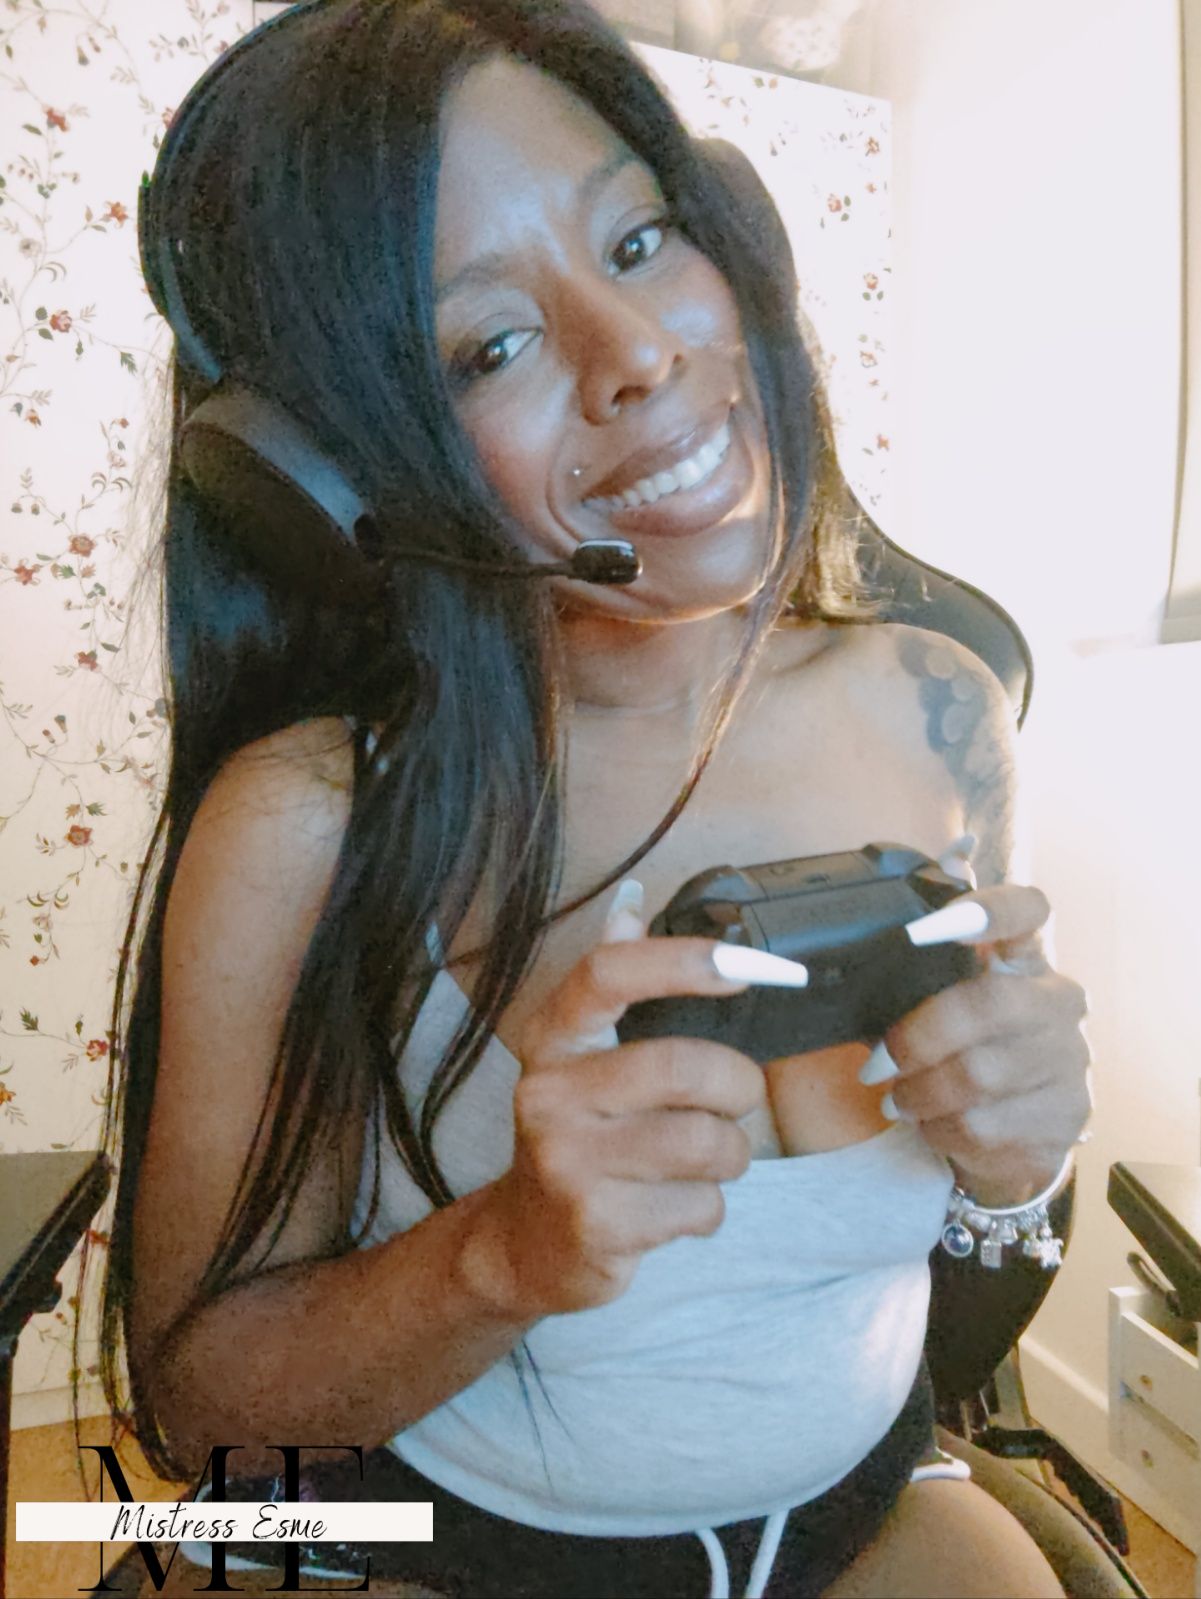 Mistress Esme in her gaming chair with headset on and controller in her hand.